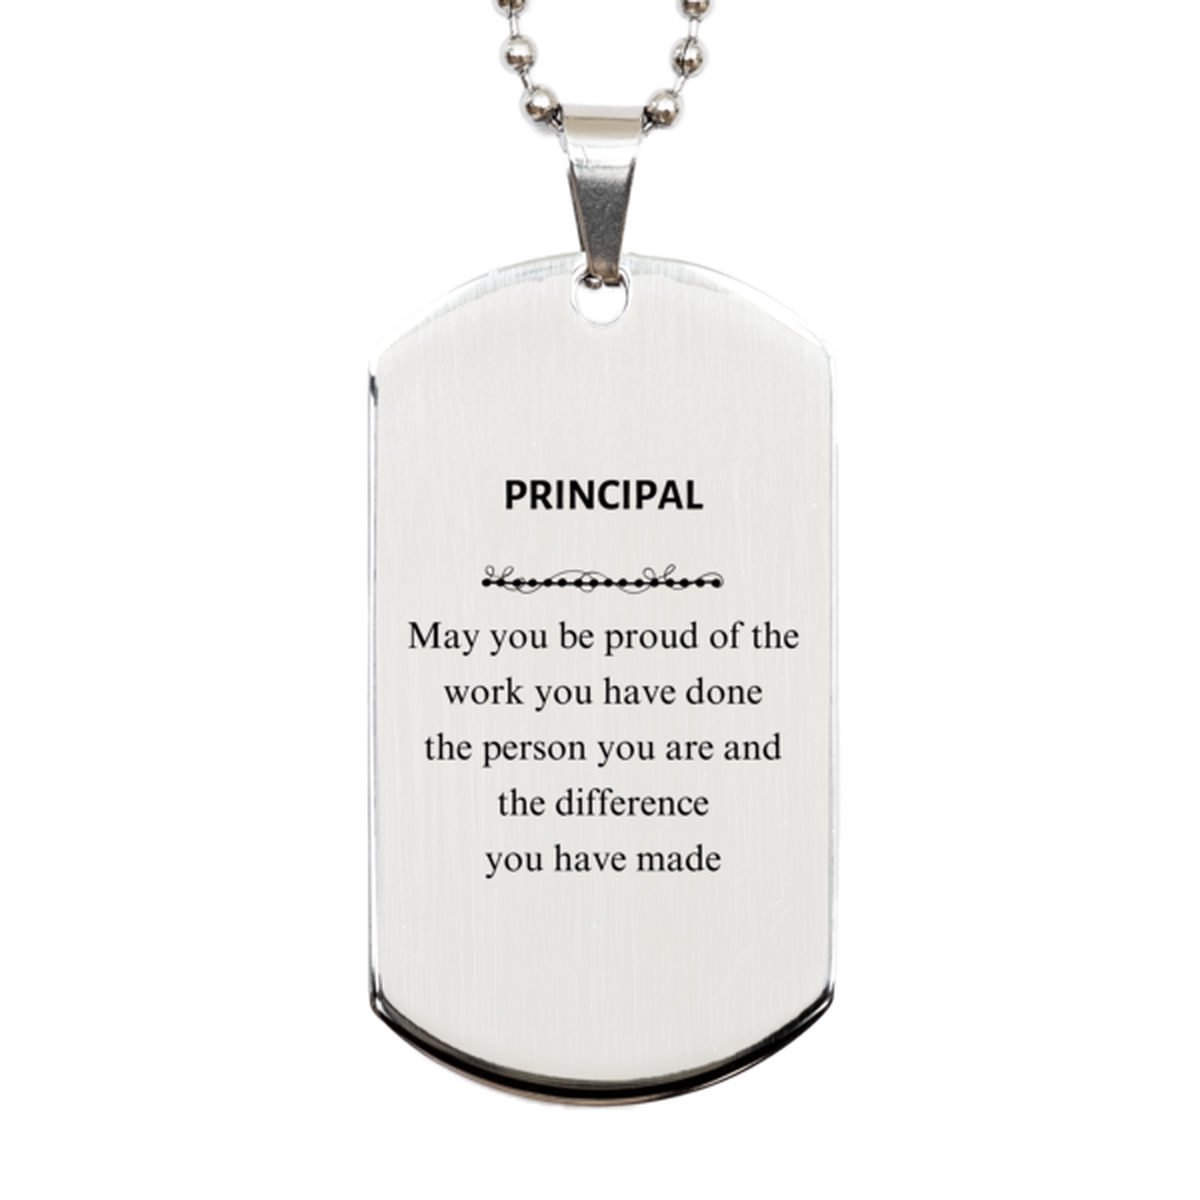 Principal May you be proud of the work you have done, Retirement Principal Silver Dog Tag for Colleague Appreciation Gifts Amazing for Principal